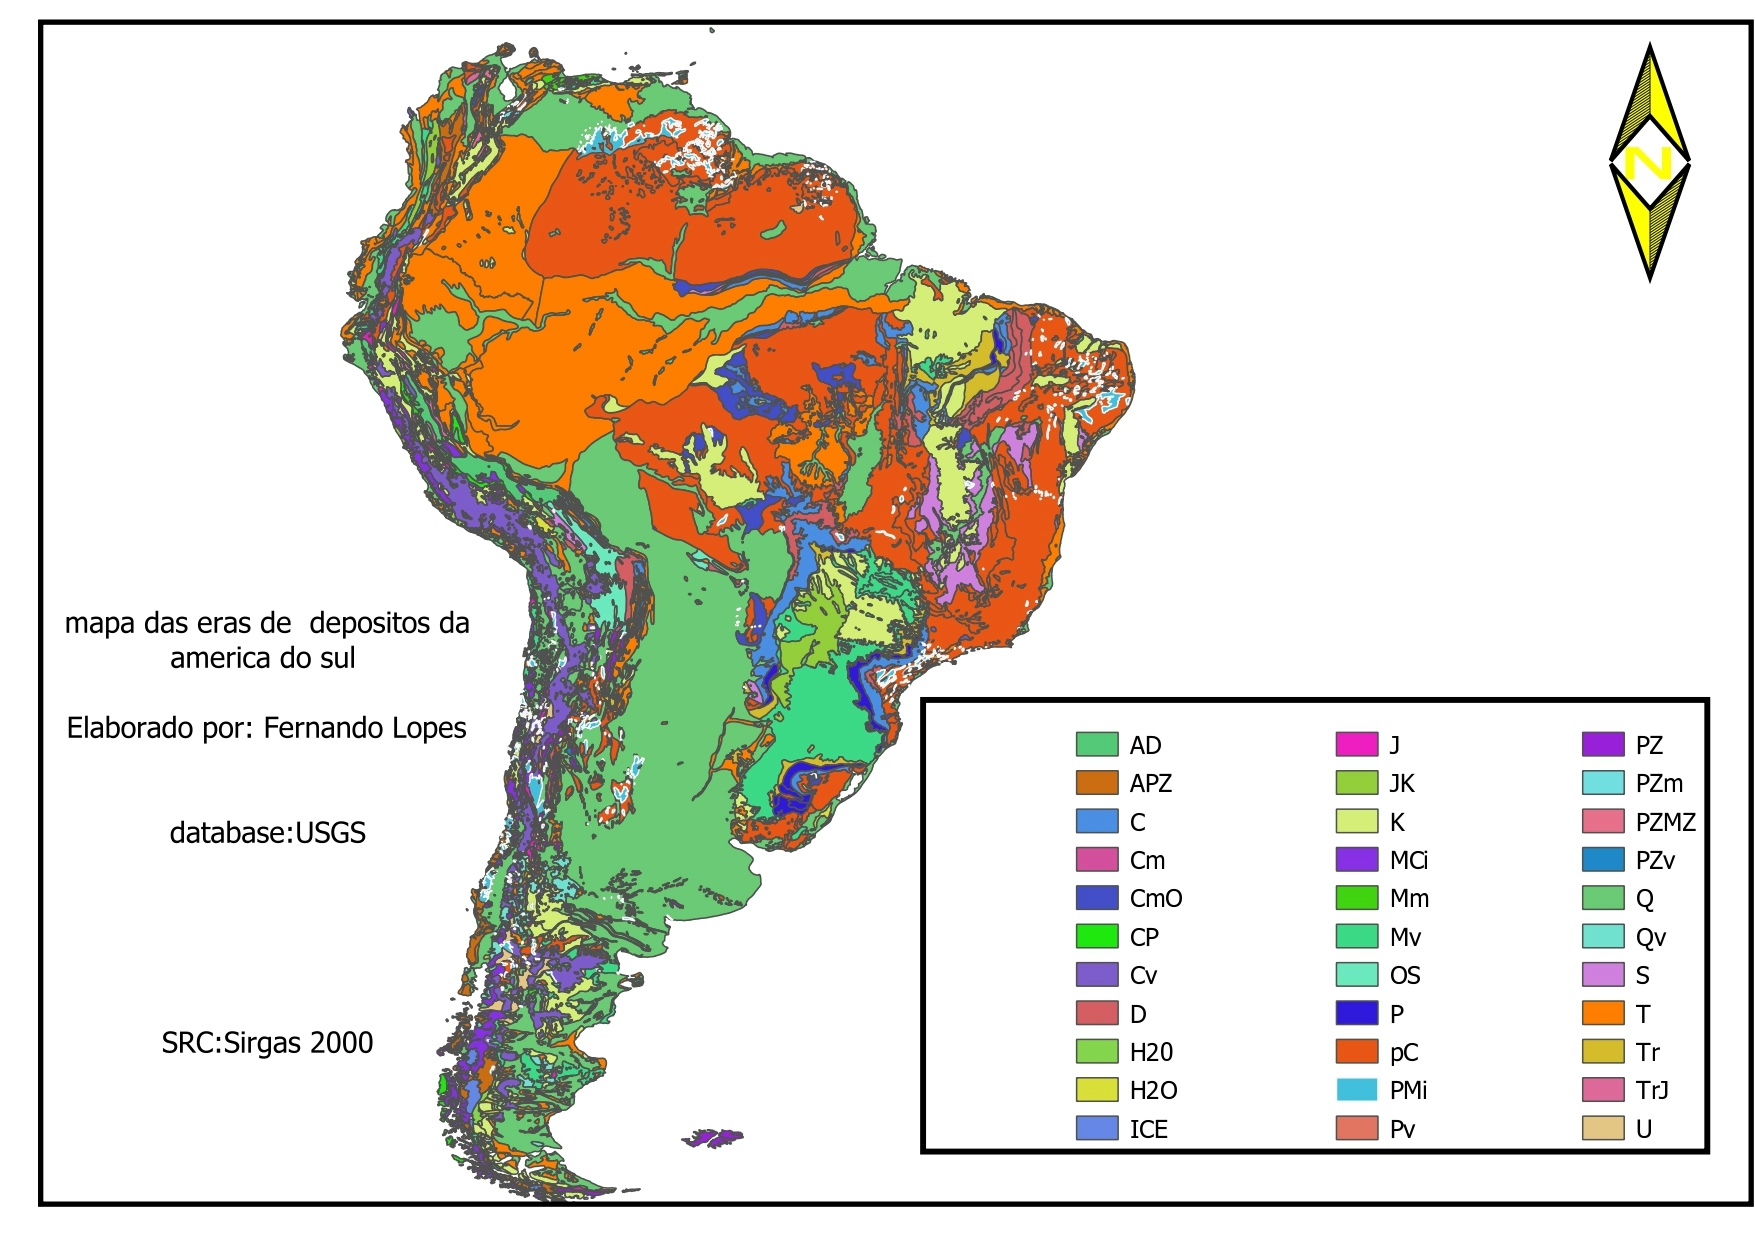 geological ages of sediments in Brazil